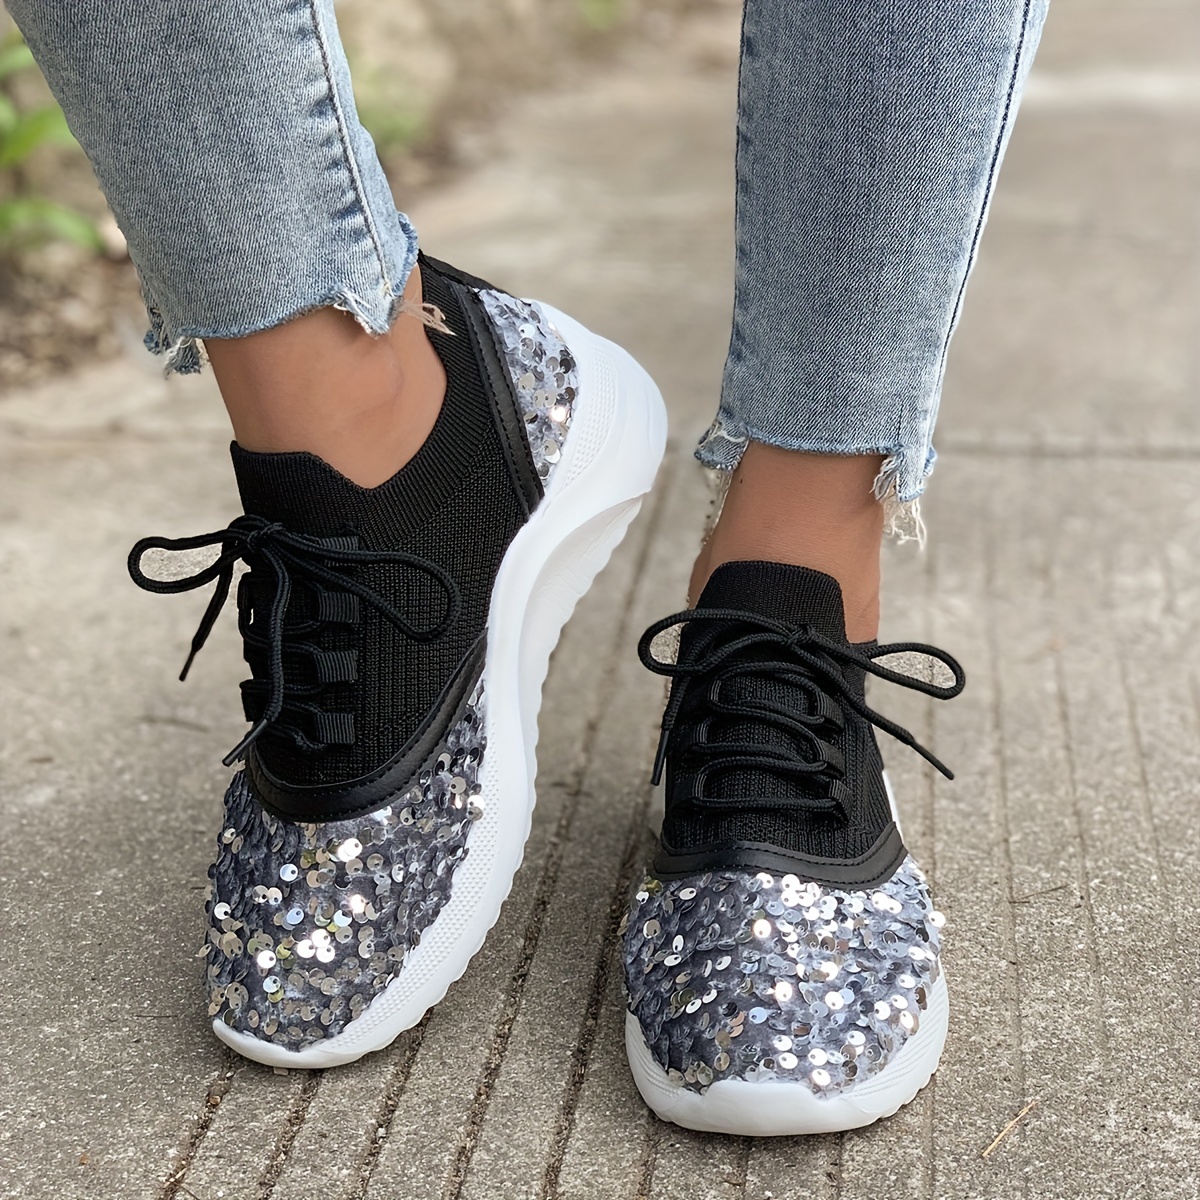 Solid Color Glitter Sneakers, Women's Sequins Decor Lightweight Casual Slip Sneakers,Women Tennis Shoes,Temu